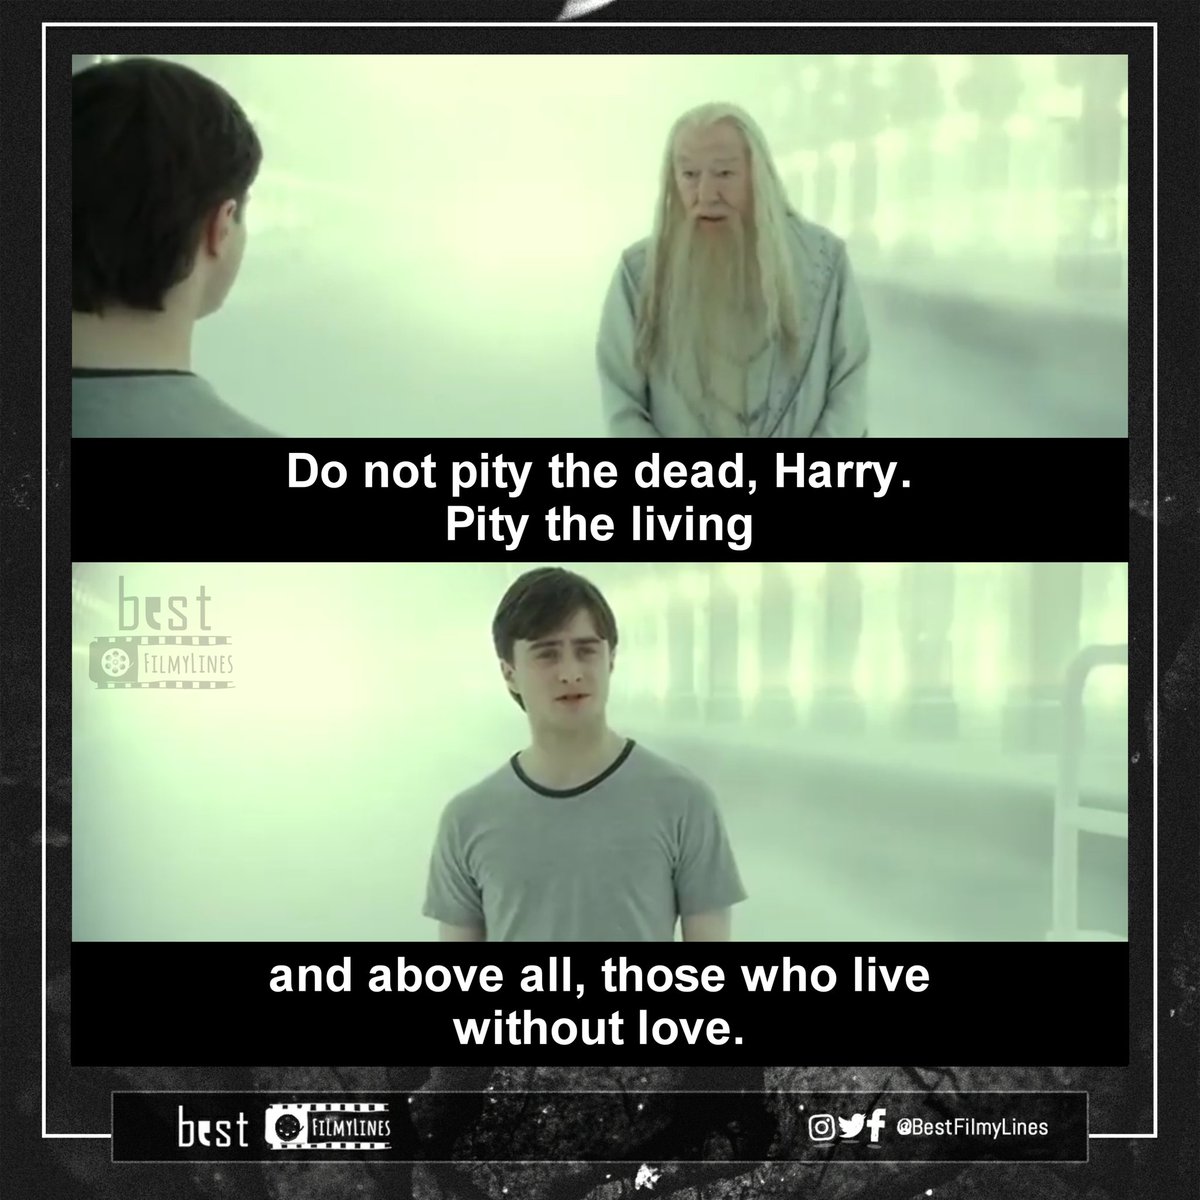 - Harry Potter and the Deathly Hallows: Part 2 (2011)
Director: David Yates

 #hollywood #hollywoodmovie #english #cinema #movie #film #dialogue #dialogues #quote #rvcjinsta #bestfilmylines #harrypotter #harrypottermemes #professordumbledore #thedeathlyhallows #motivation